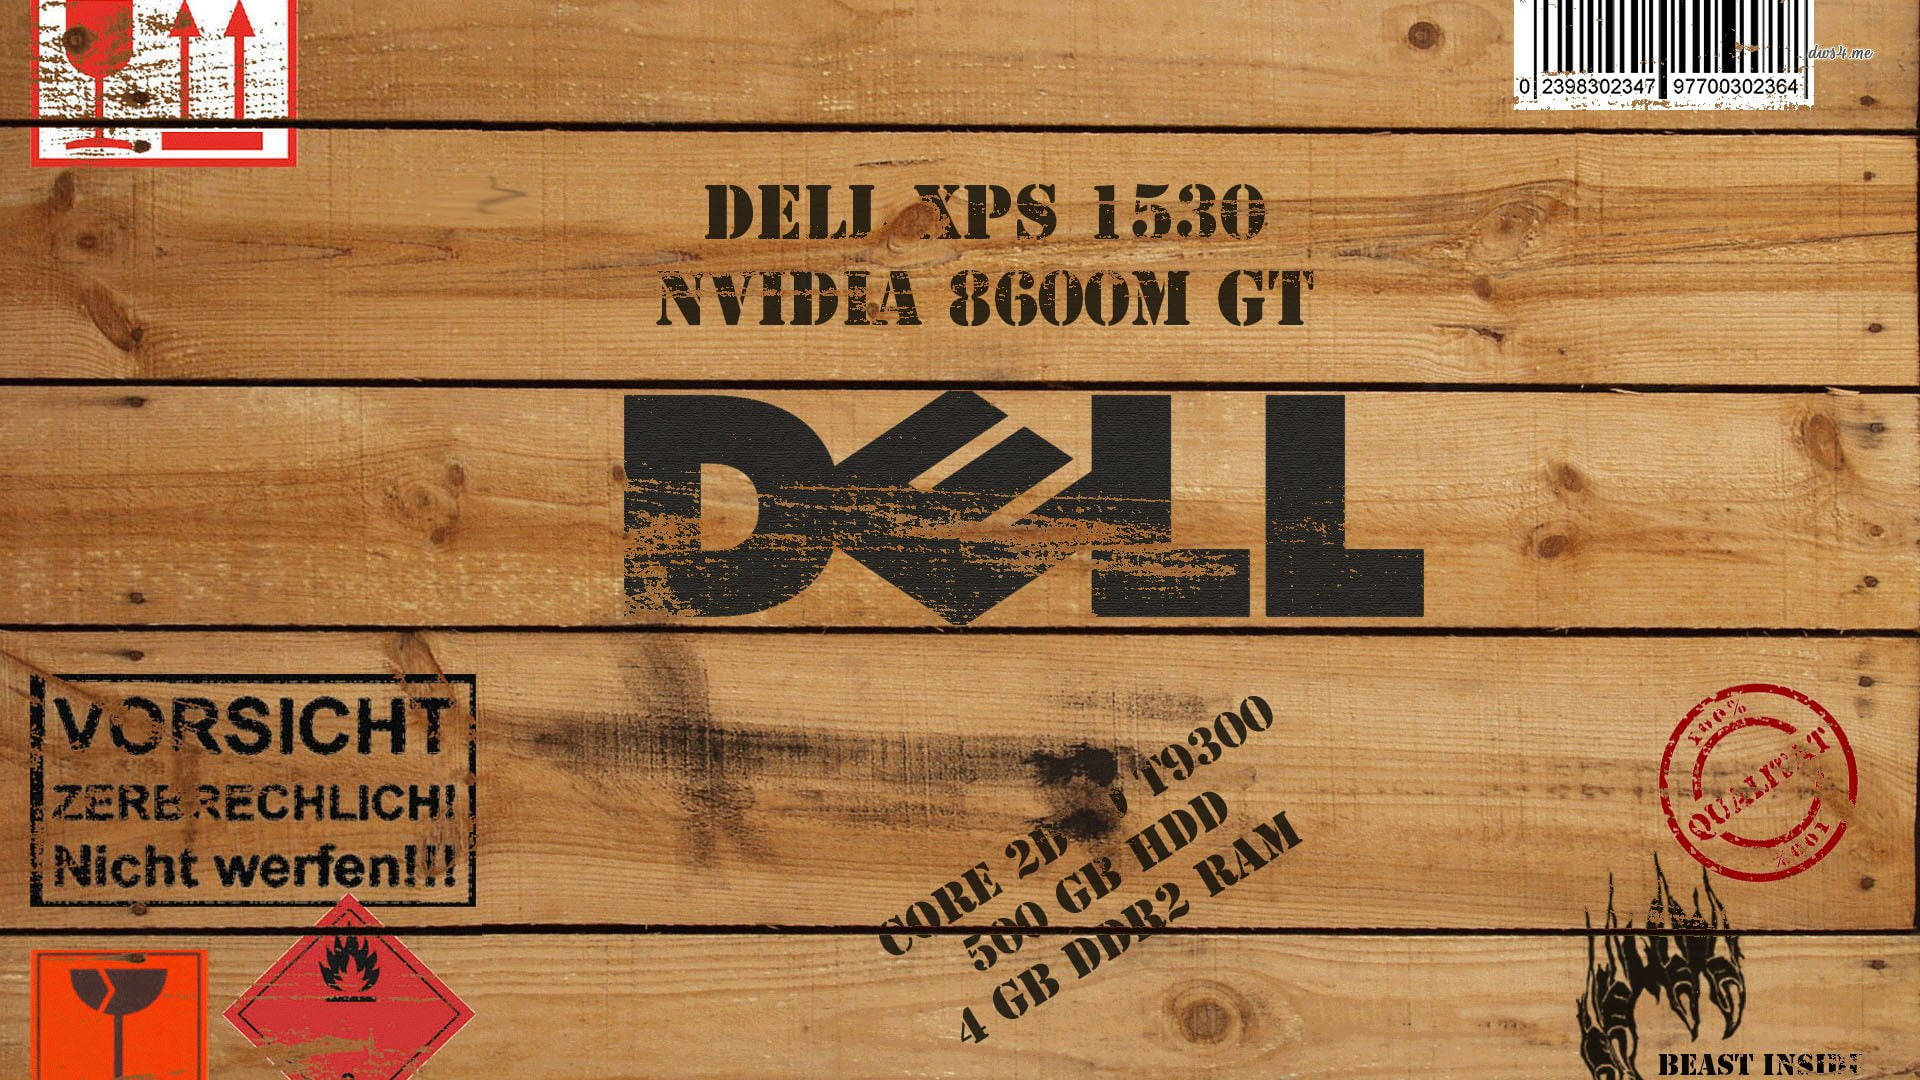 Dell Laptop Wooden Crate